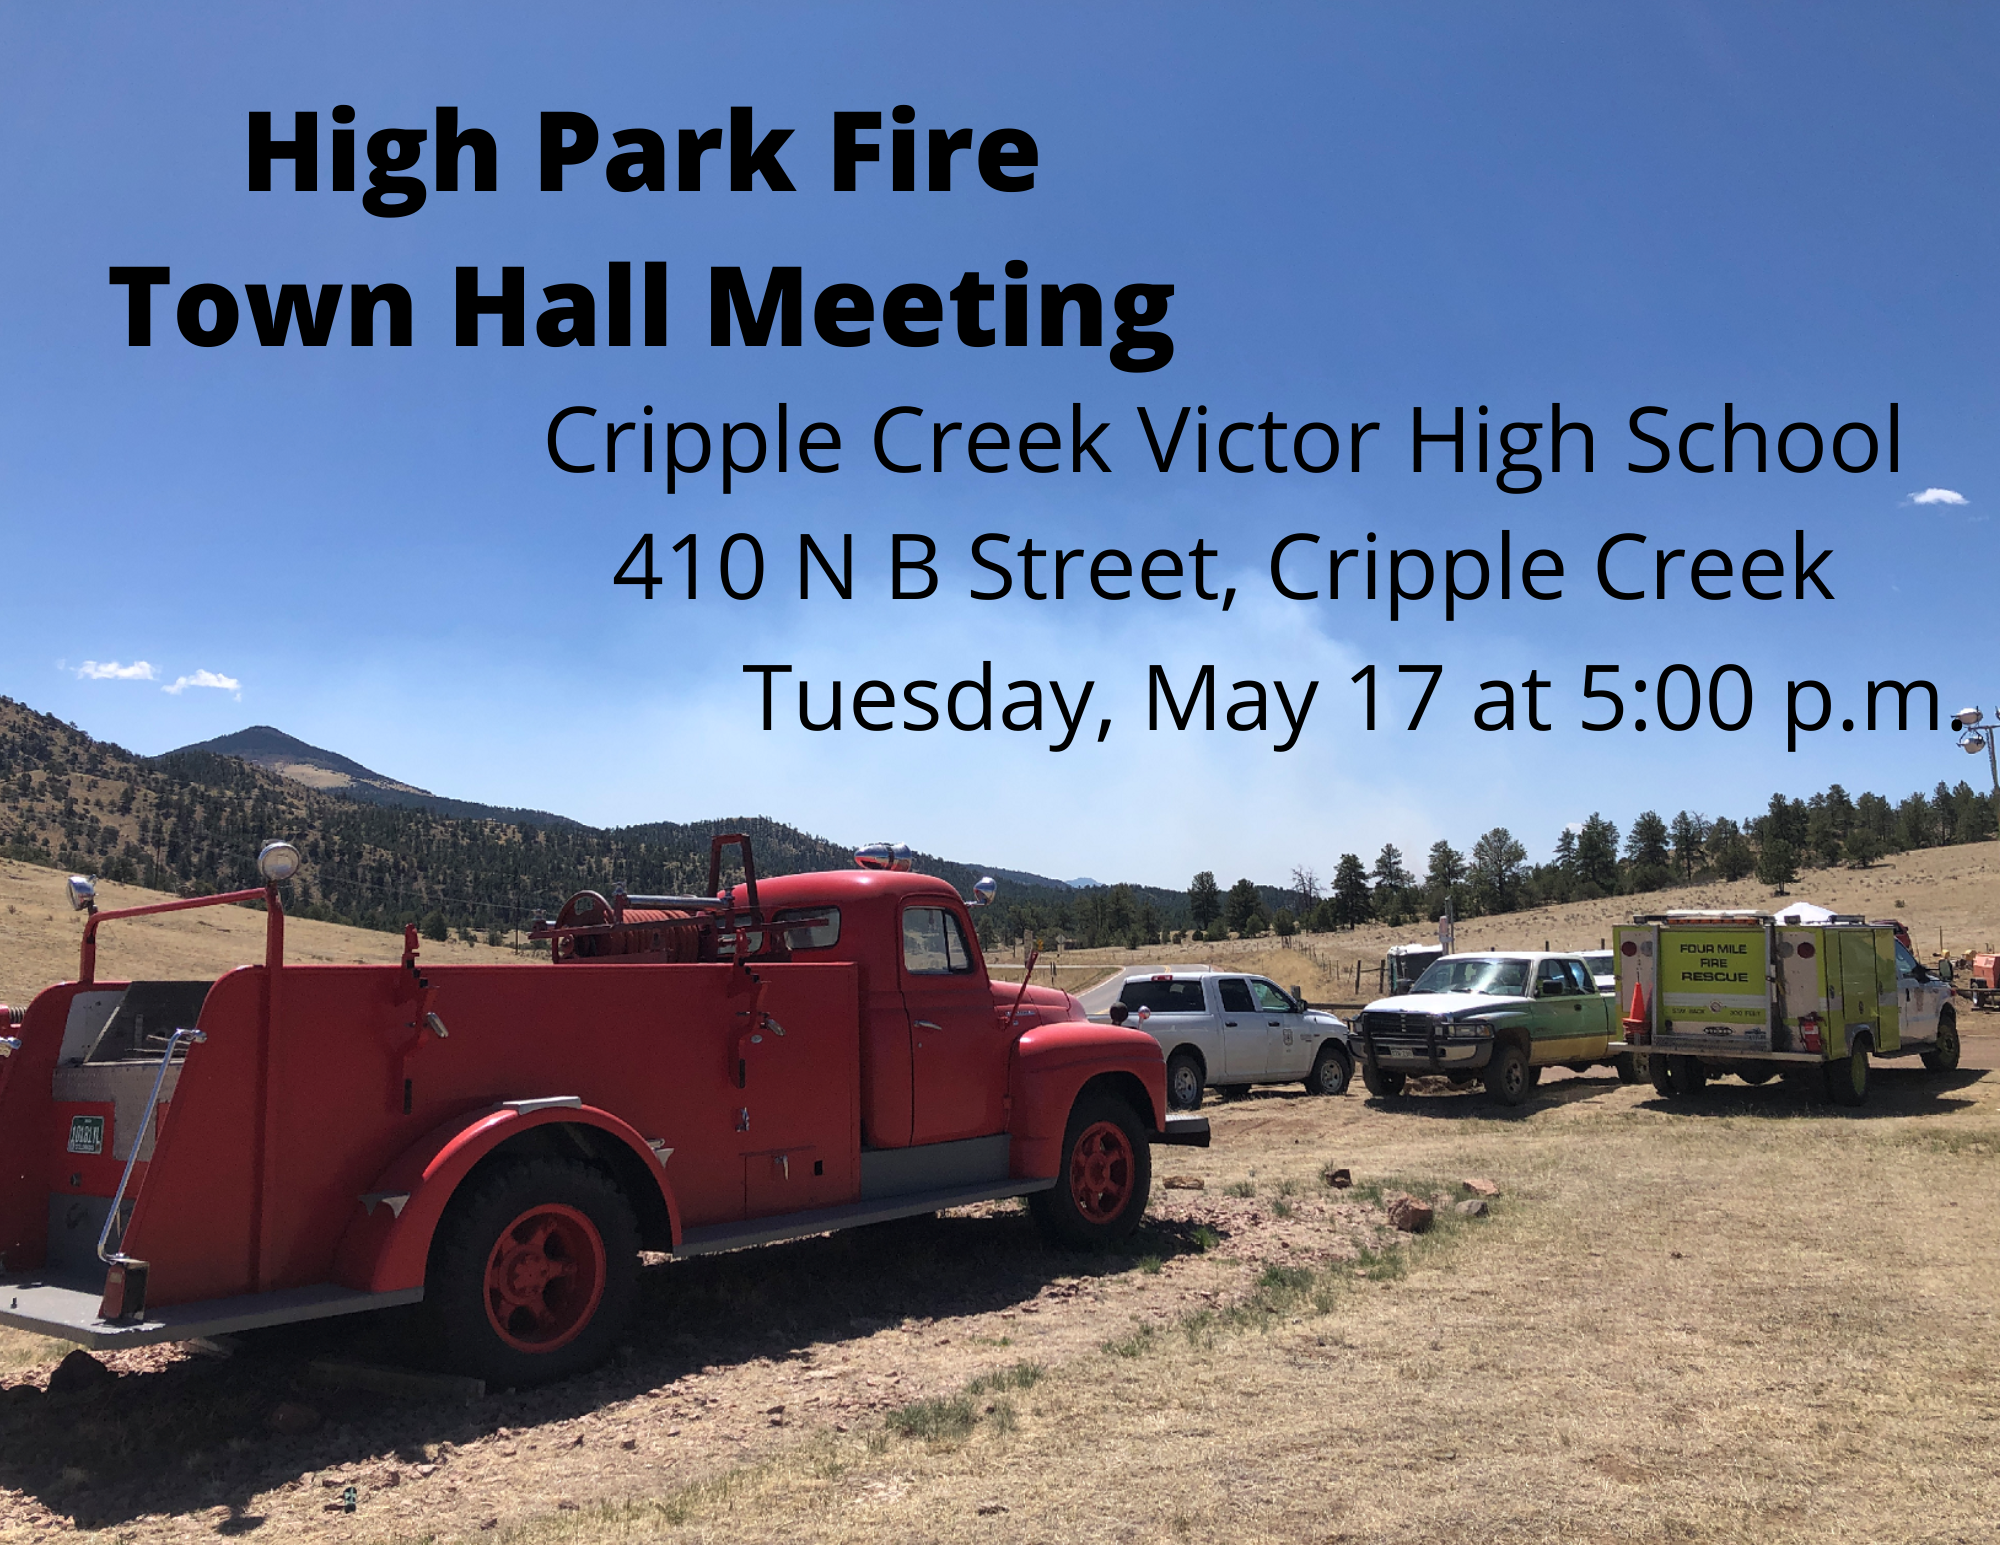 Flyer for the Town Hall Meeting to be held at the Cripple Creek Victor High School on May 17th at 5 pm